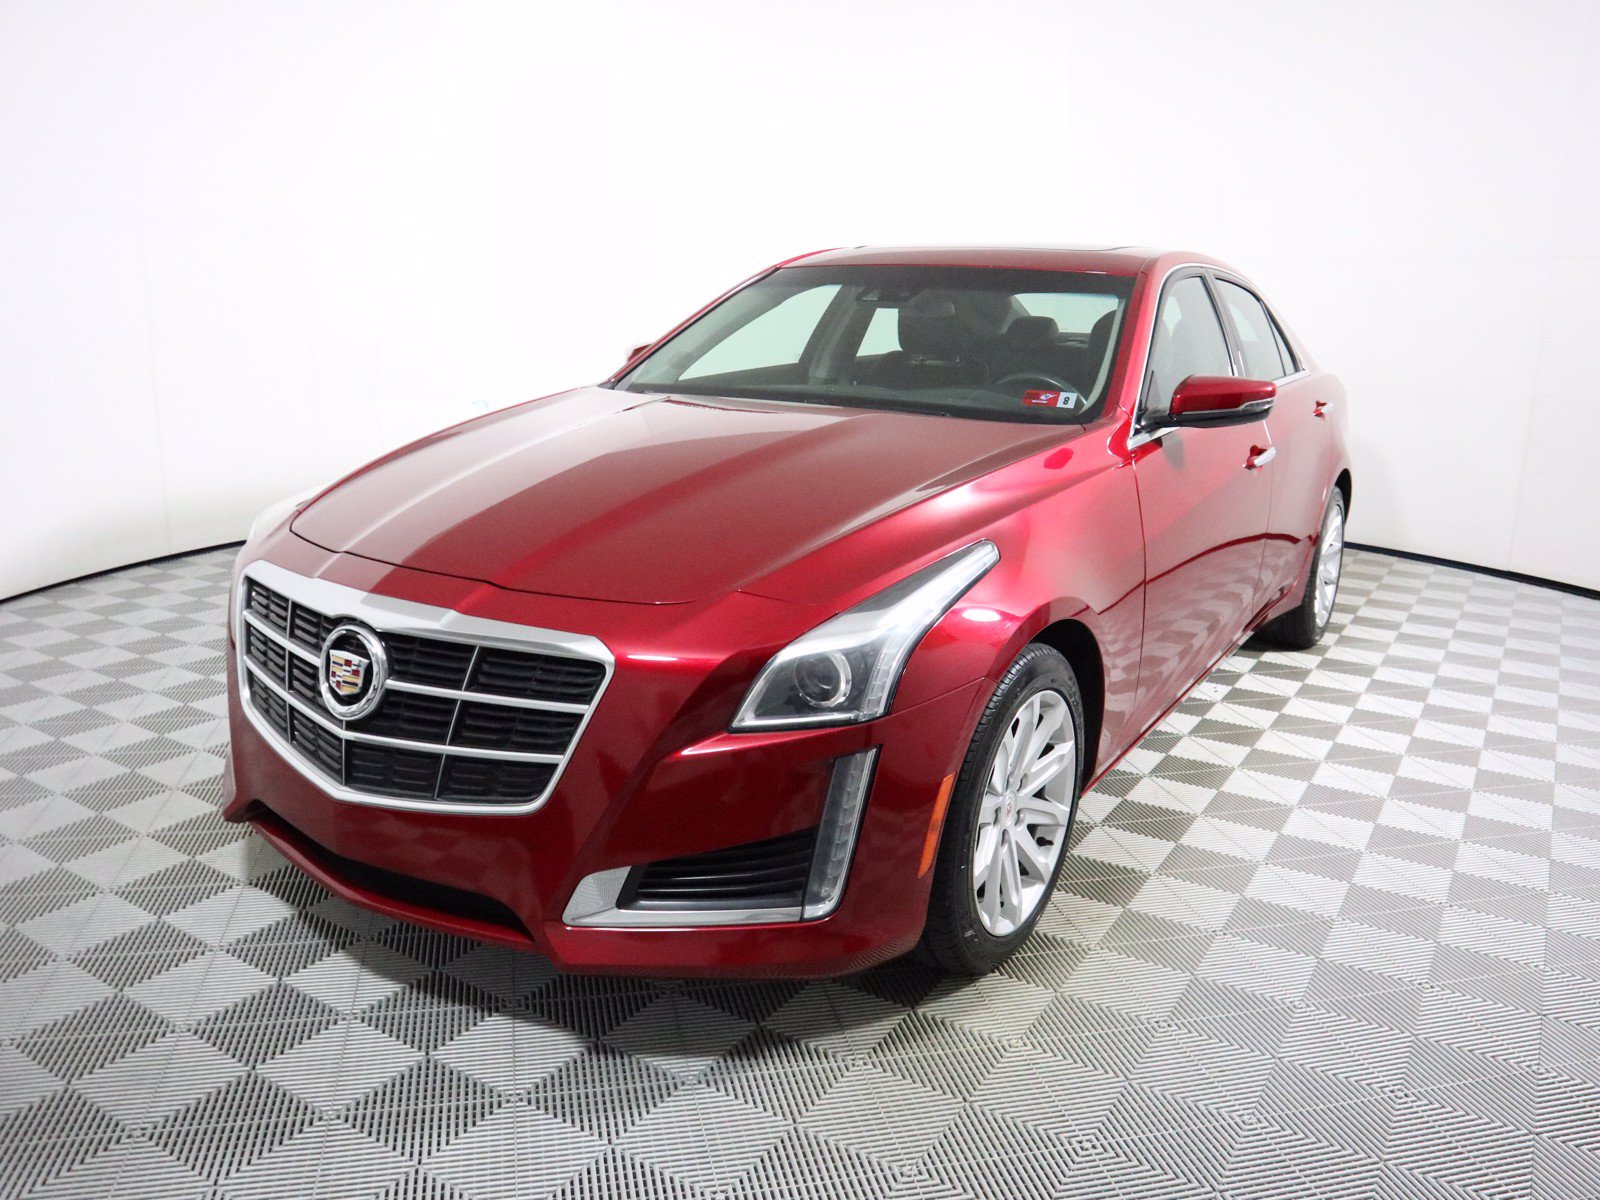 Pre-Owned 2014 Cadillac CTS Sedan Luxury AWD 4dr Car in Parkersburg #